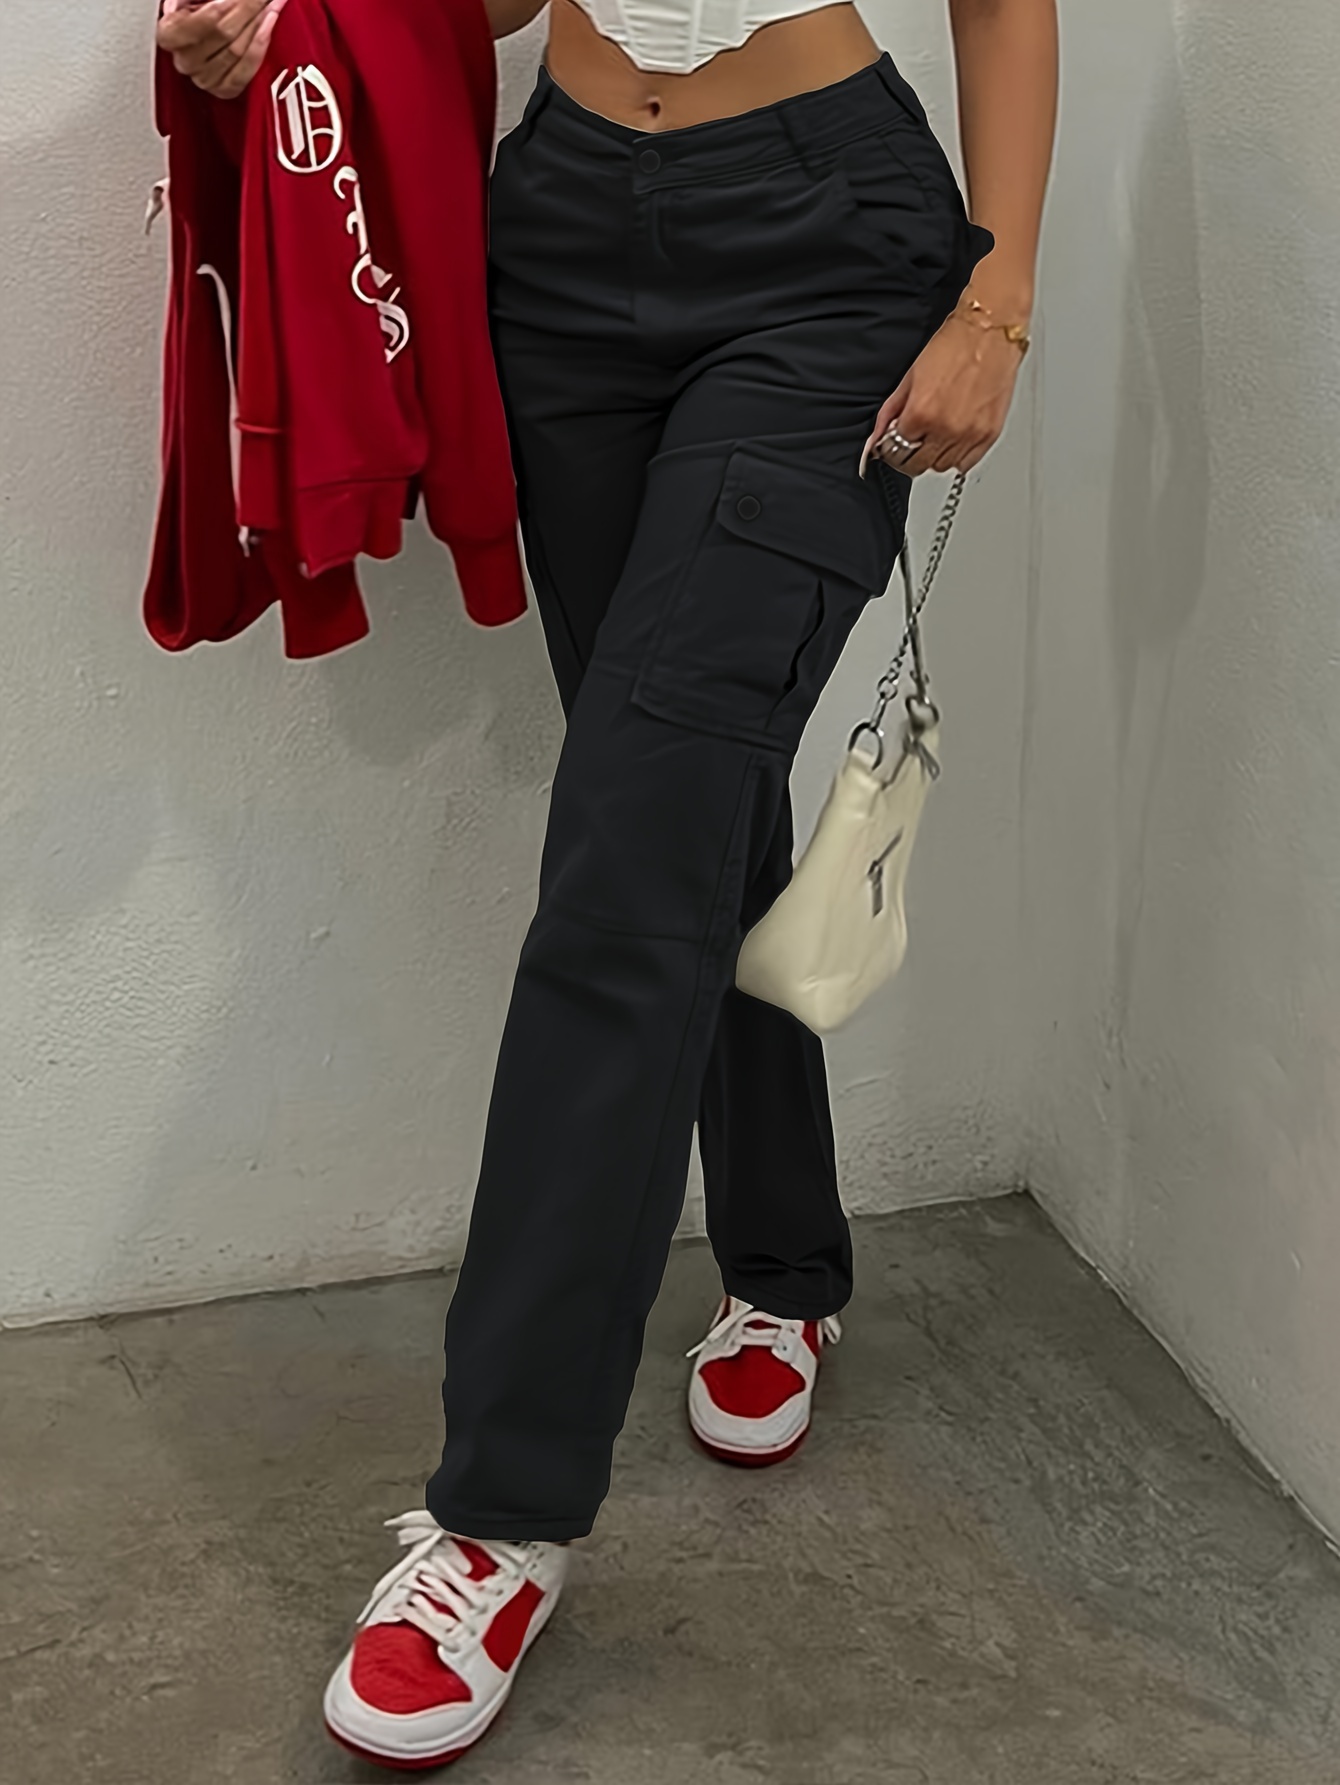 Black Cargo Pants with Red Shirt Outfits (4 ideas & outfits)